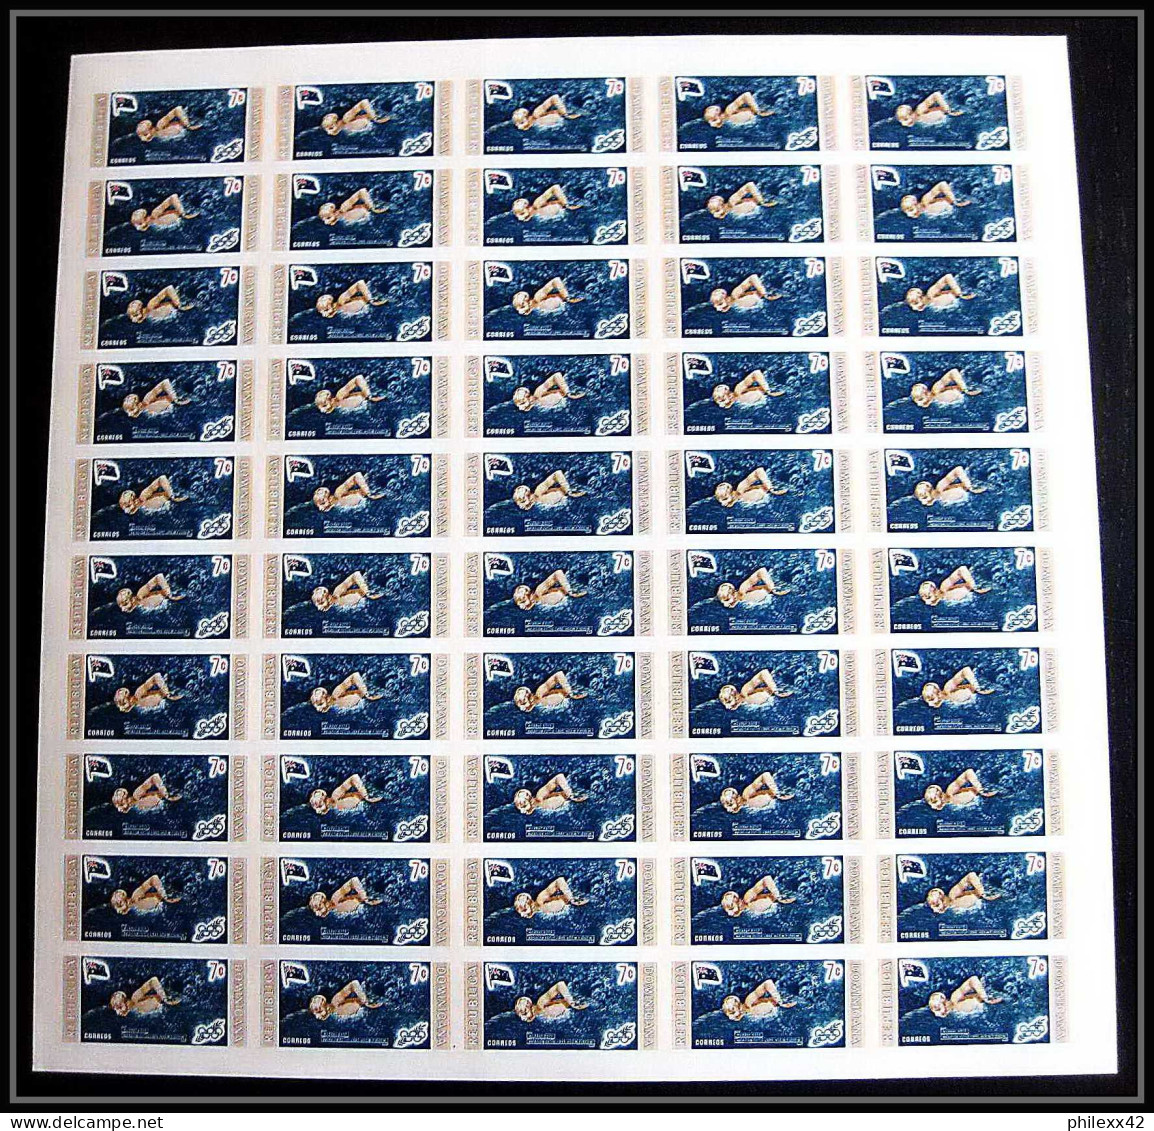 209b dominicana MNH ** N° 660 / 667 B non dentelé (Imperf) jeux olympiques (olympic games MELBOURNE feuilles sheets